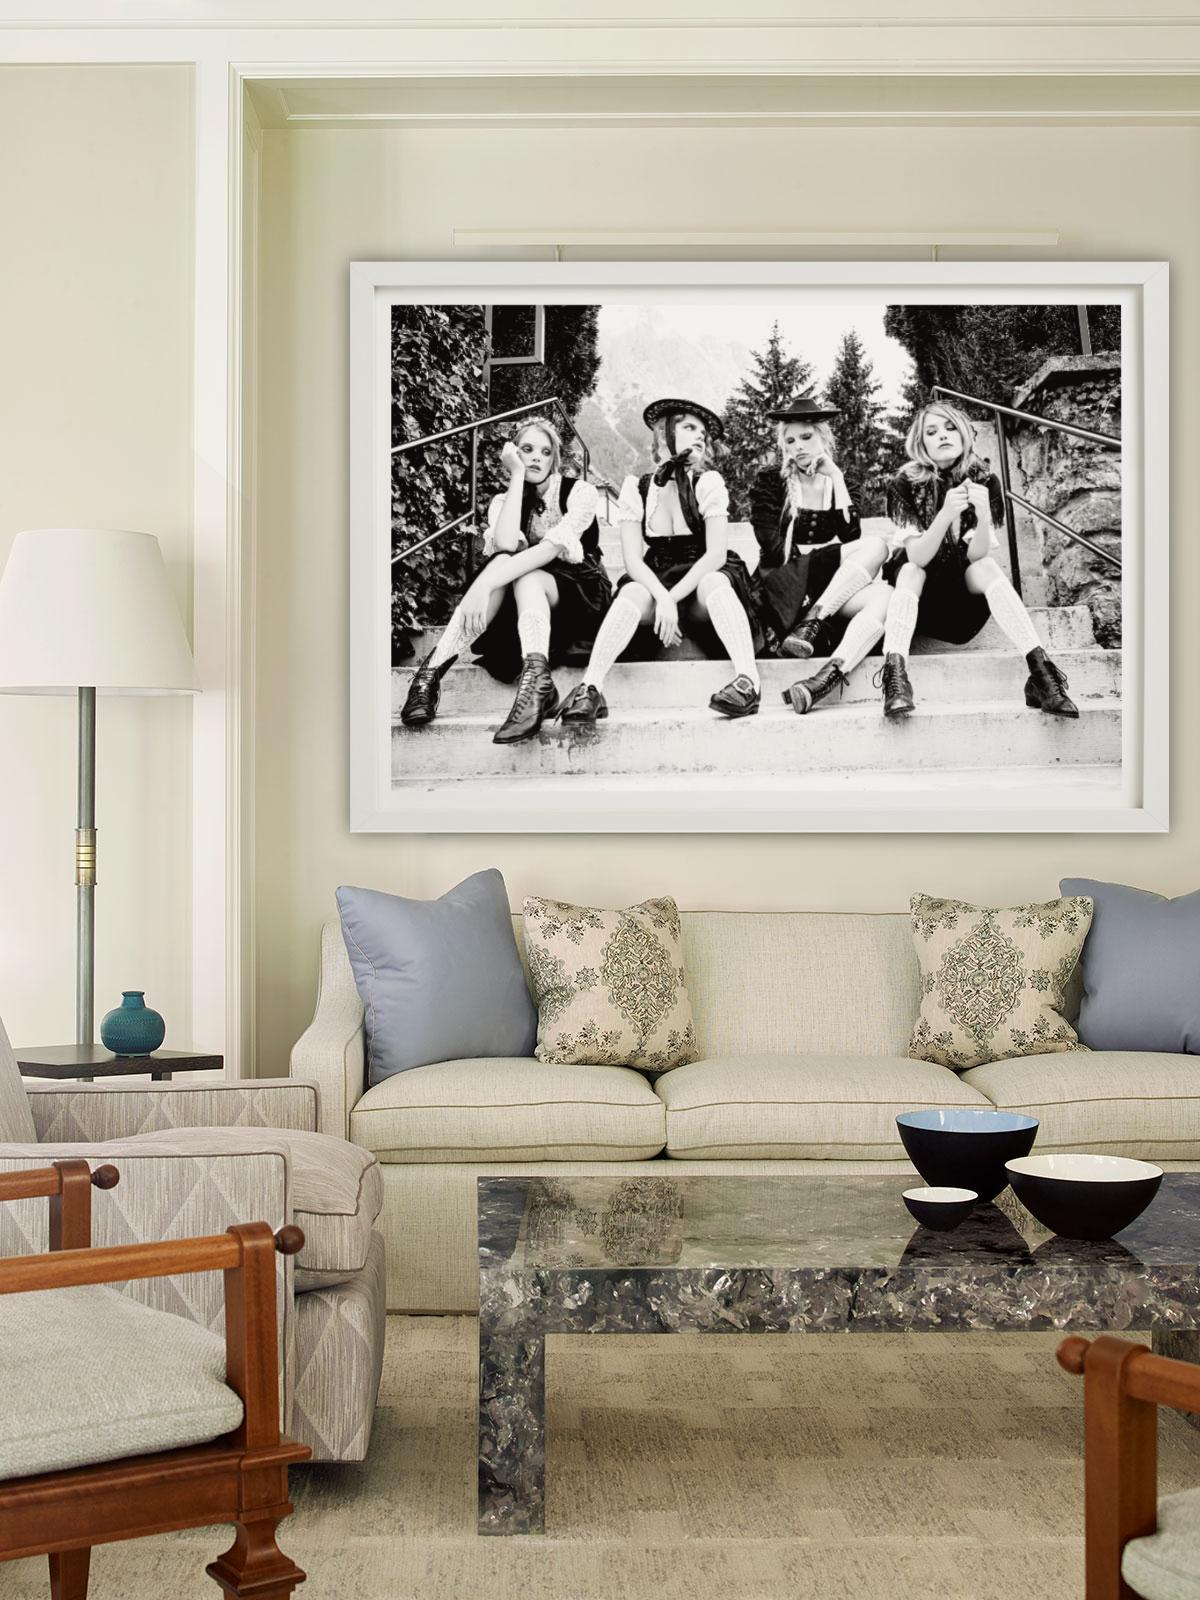 Other sizes and high-end framing on request.

PREISS FINE ARTS is one of the world’s leading galleries for fine art photography, representing the most famous contemporary artists.

Ellen von Unwerth is one of the world's most famous and influential